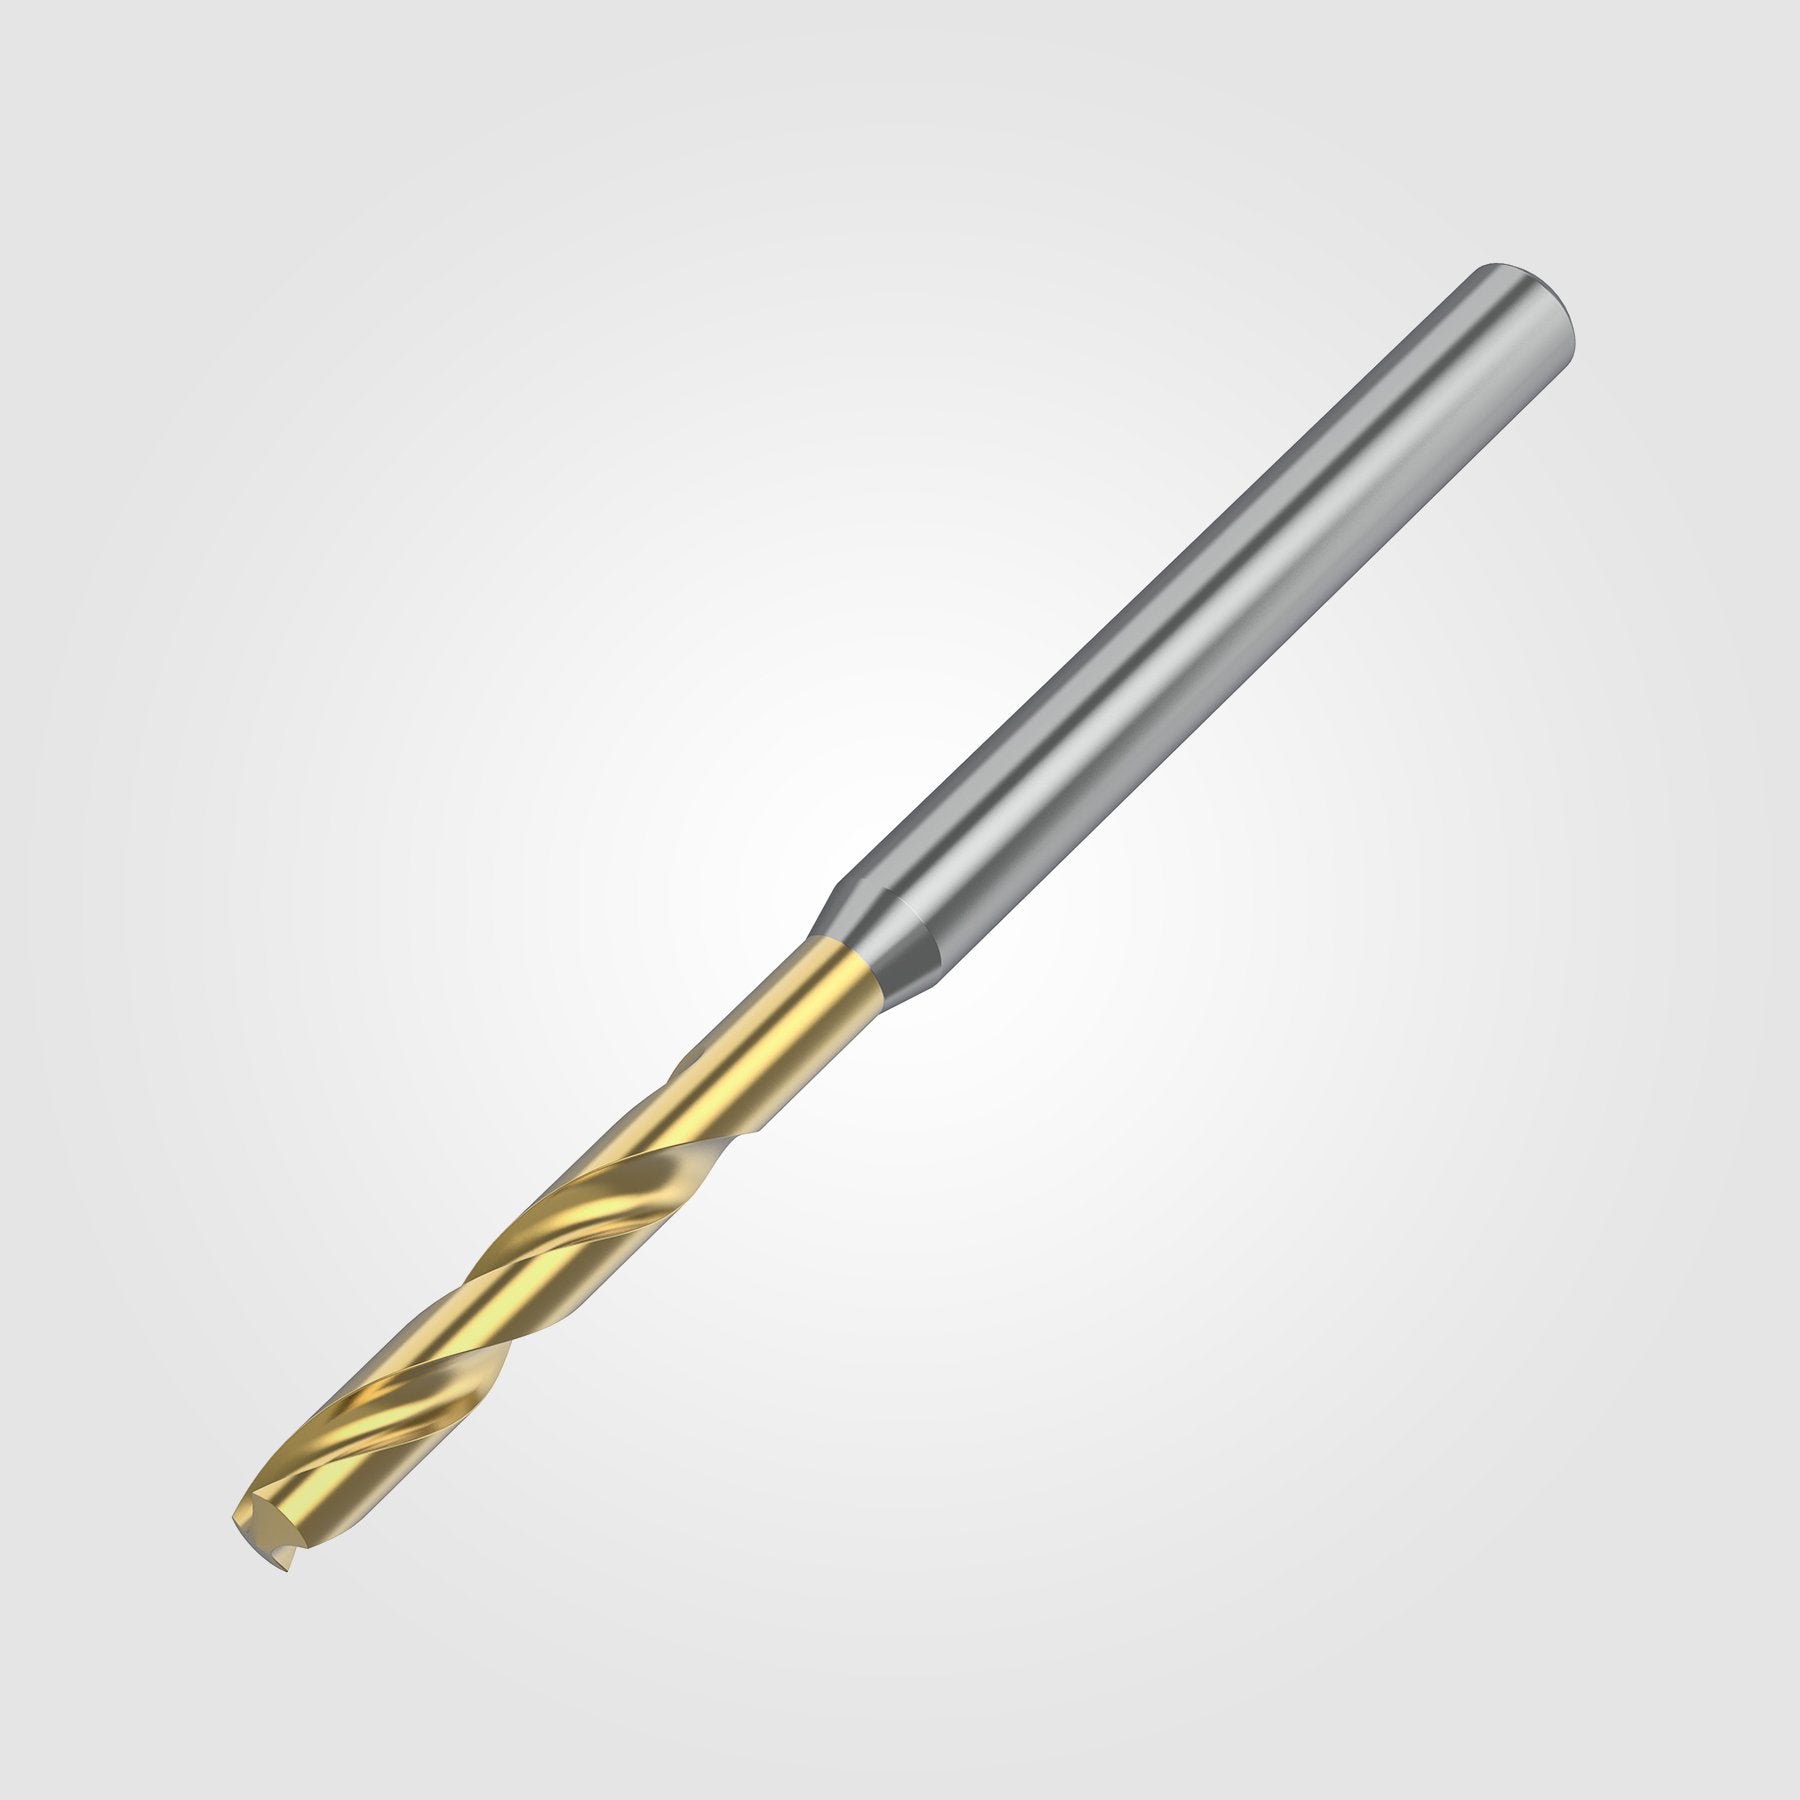 GOdrill (THROUGH COOLANT) | 2.5mm / .0984" / 3xD | SOLID CARBIDE DRILL | 4148847